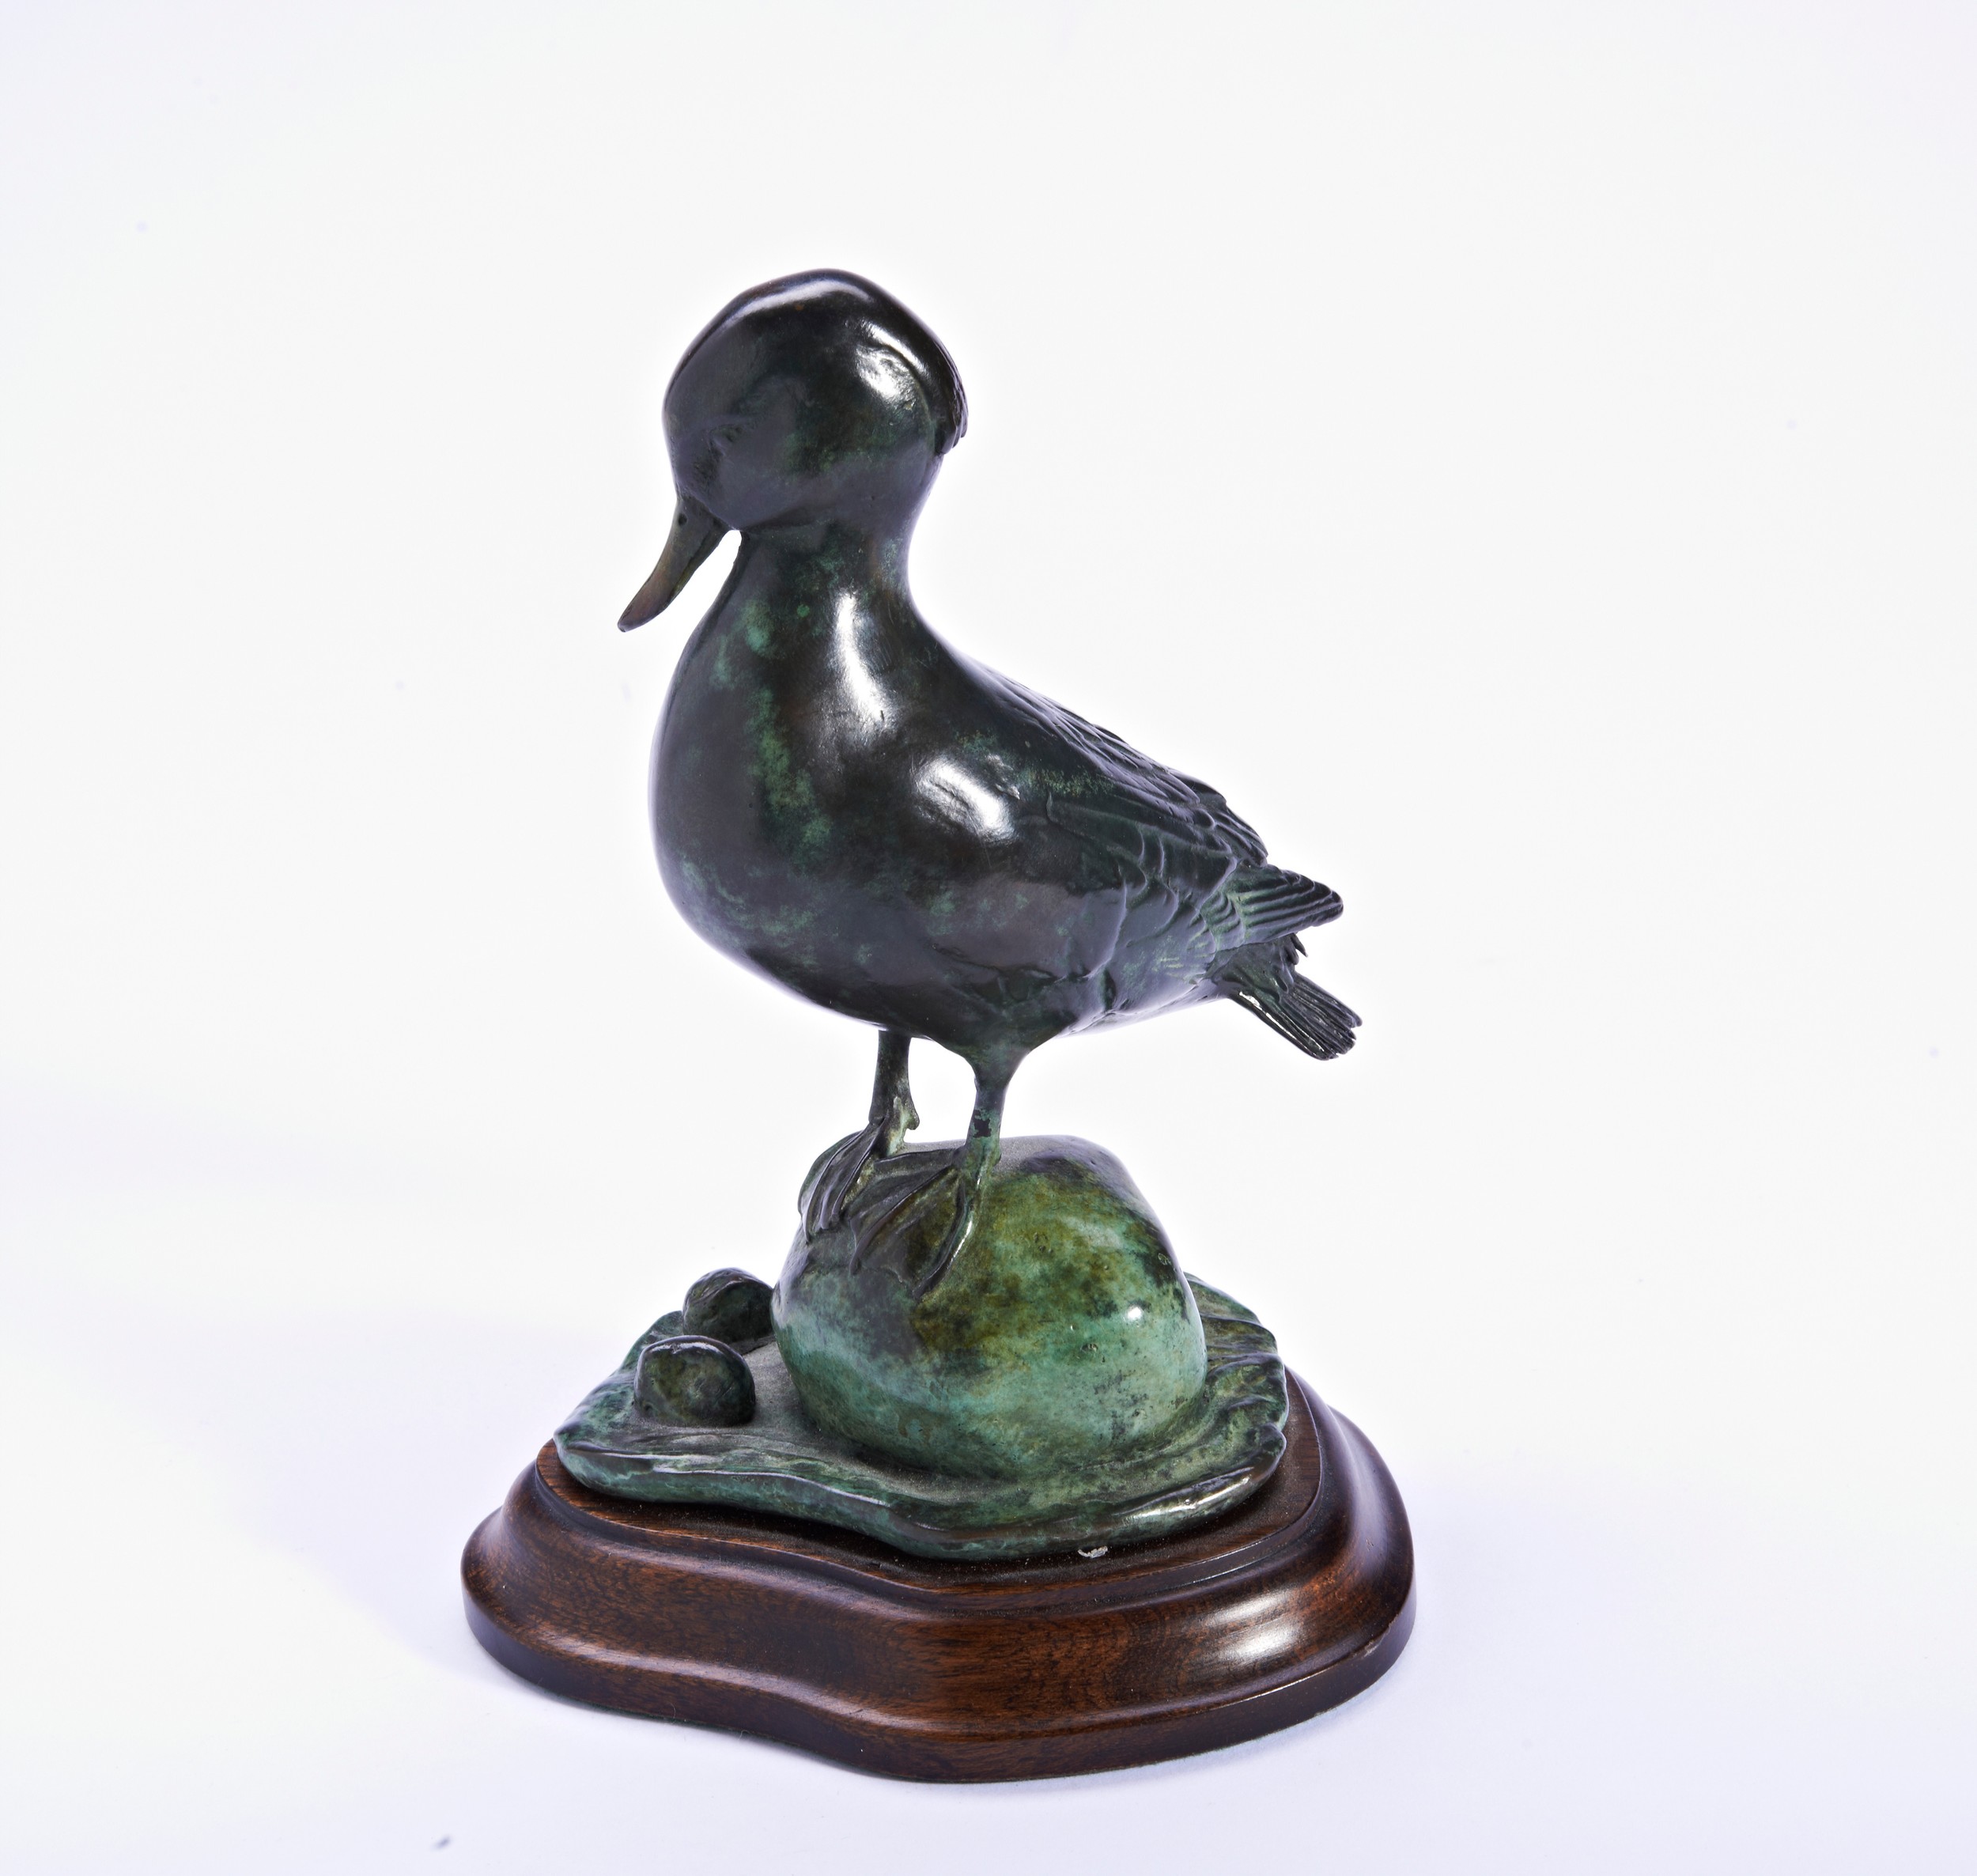 PATRICIA NORTHCROFT, A BRONZE TEAL SCULPTURE, 140/150, on a wooden base. 13.5 cms high.